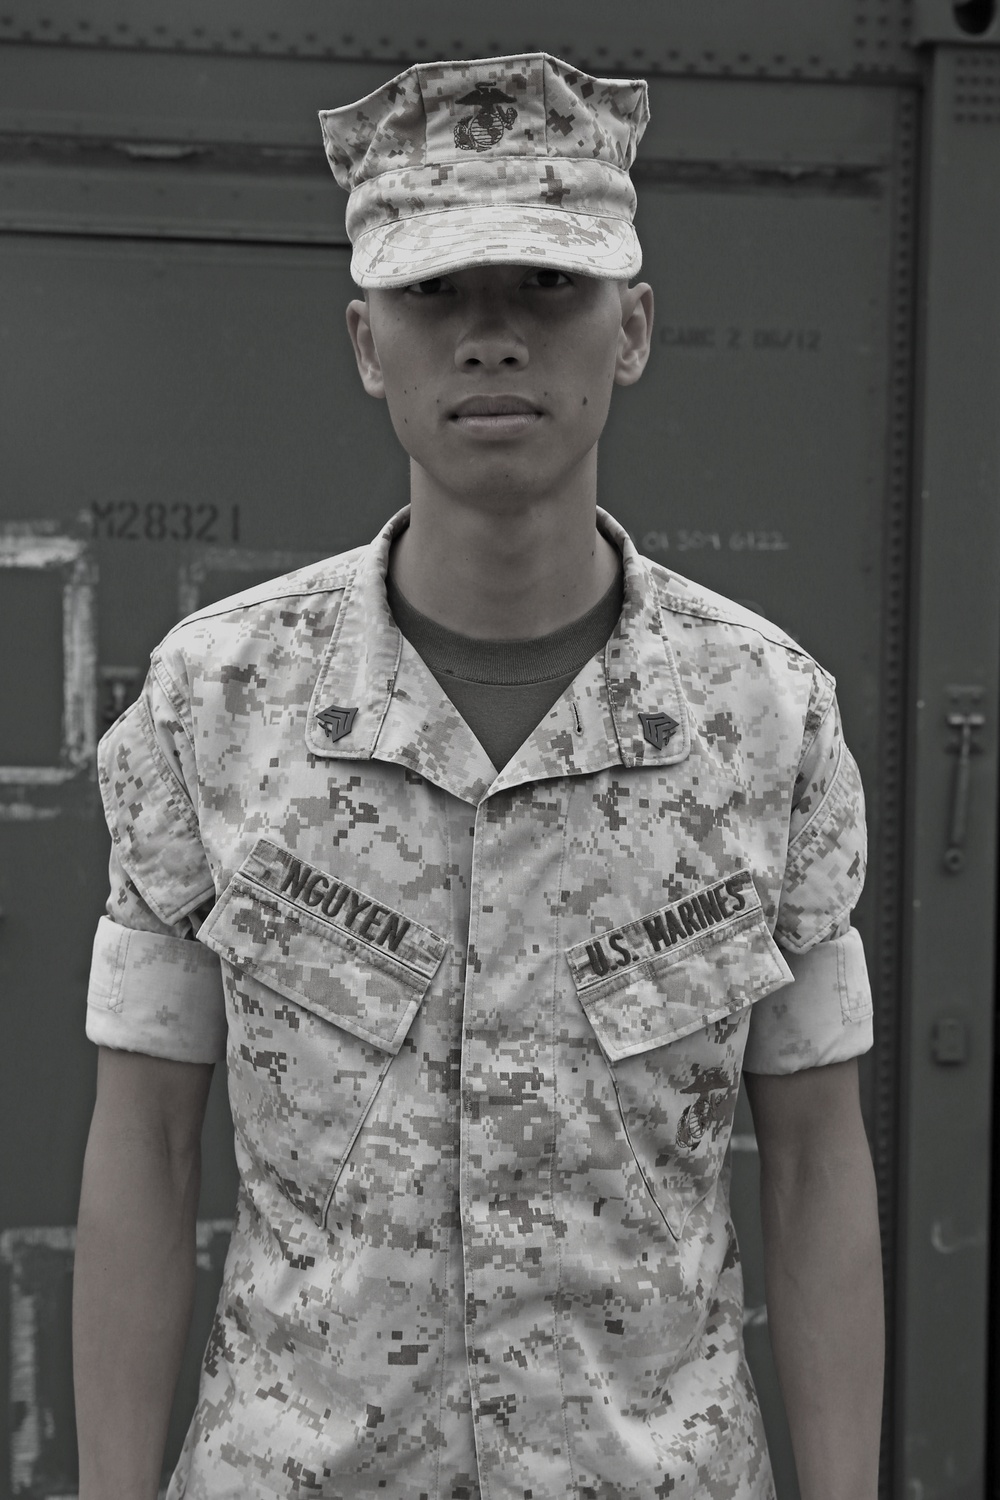 Q&amp;A with Sgt. Thanhtam Nguyen